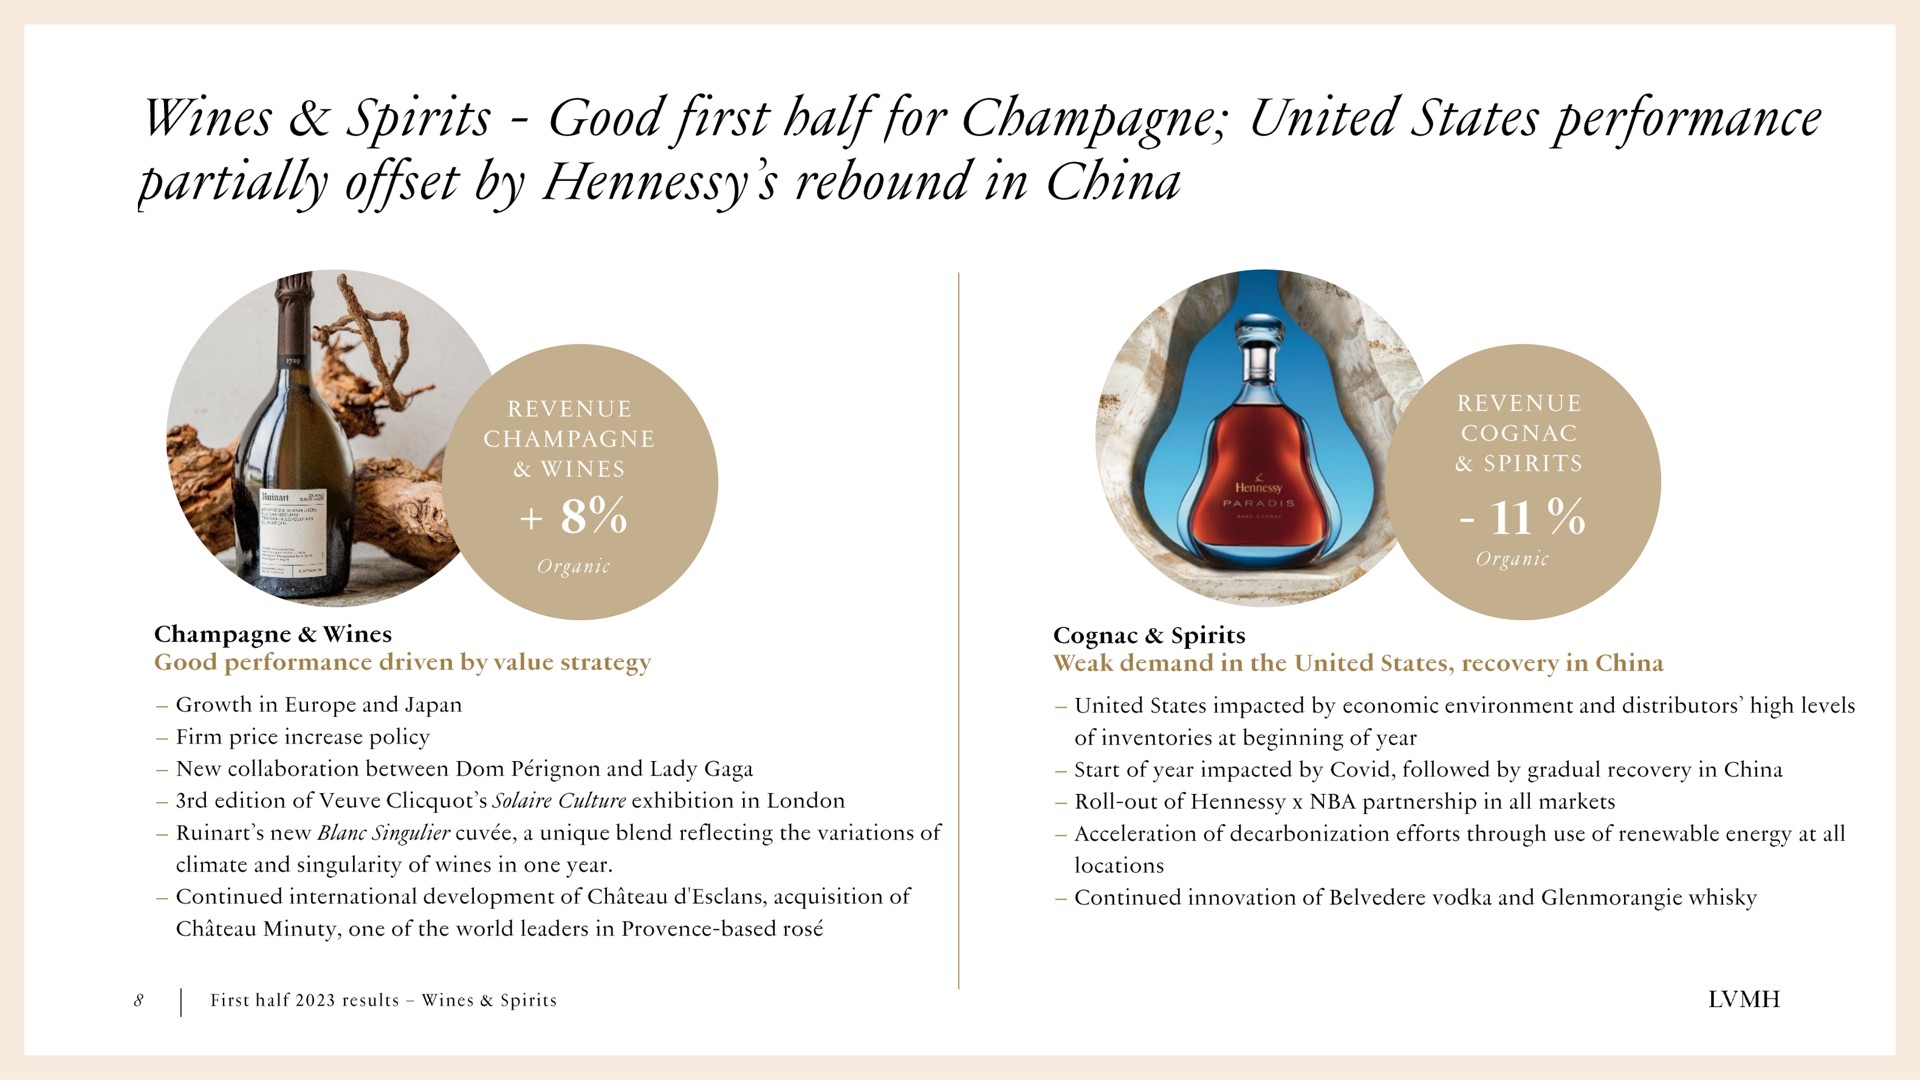 wines spirits good first half for champagne united states performance partially offset by rebound in china | LVMH